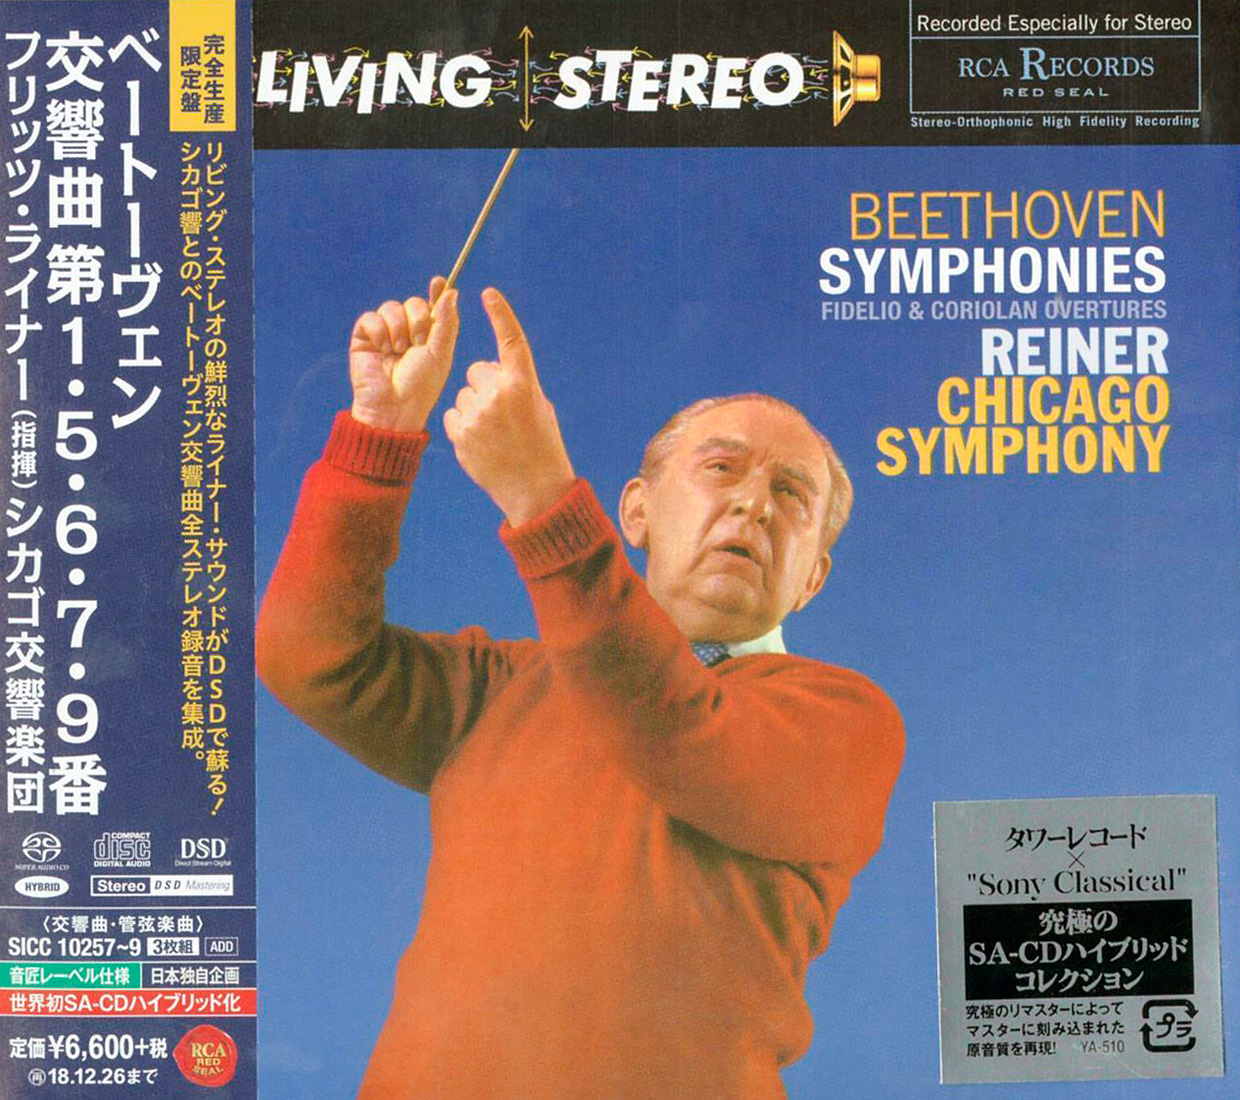 Fritz Reiner, Chicago Symphony Orchestra – Beethoven: Symphonies & Overtures (Japan 2018) SACD ISO + Hi-Res FLAC